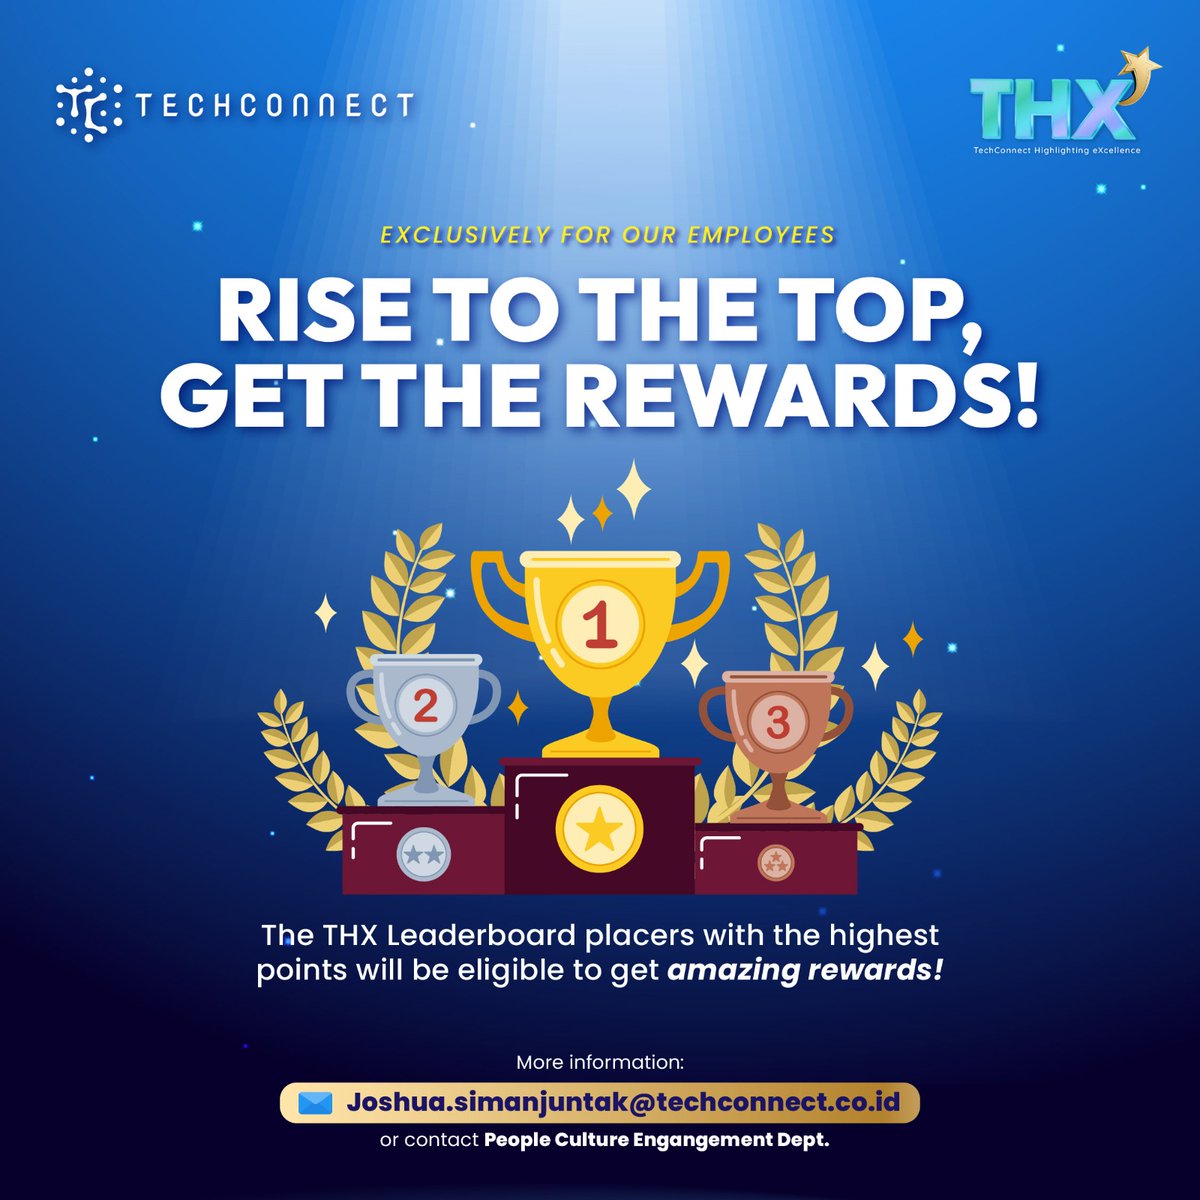 Exclusively for our employees, TechConnect's new rewards program THX (TechConnect Highlighting eXcellence) will feature a leaderboard where employees can engage in a fun competition to win points.
#TechConnect #THX #employeesonly #rewardsprogram #employeerewards